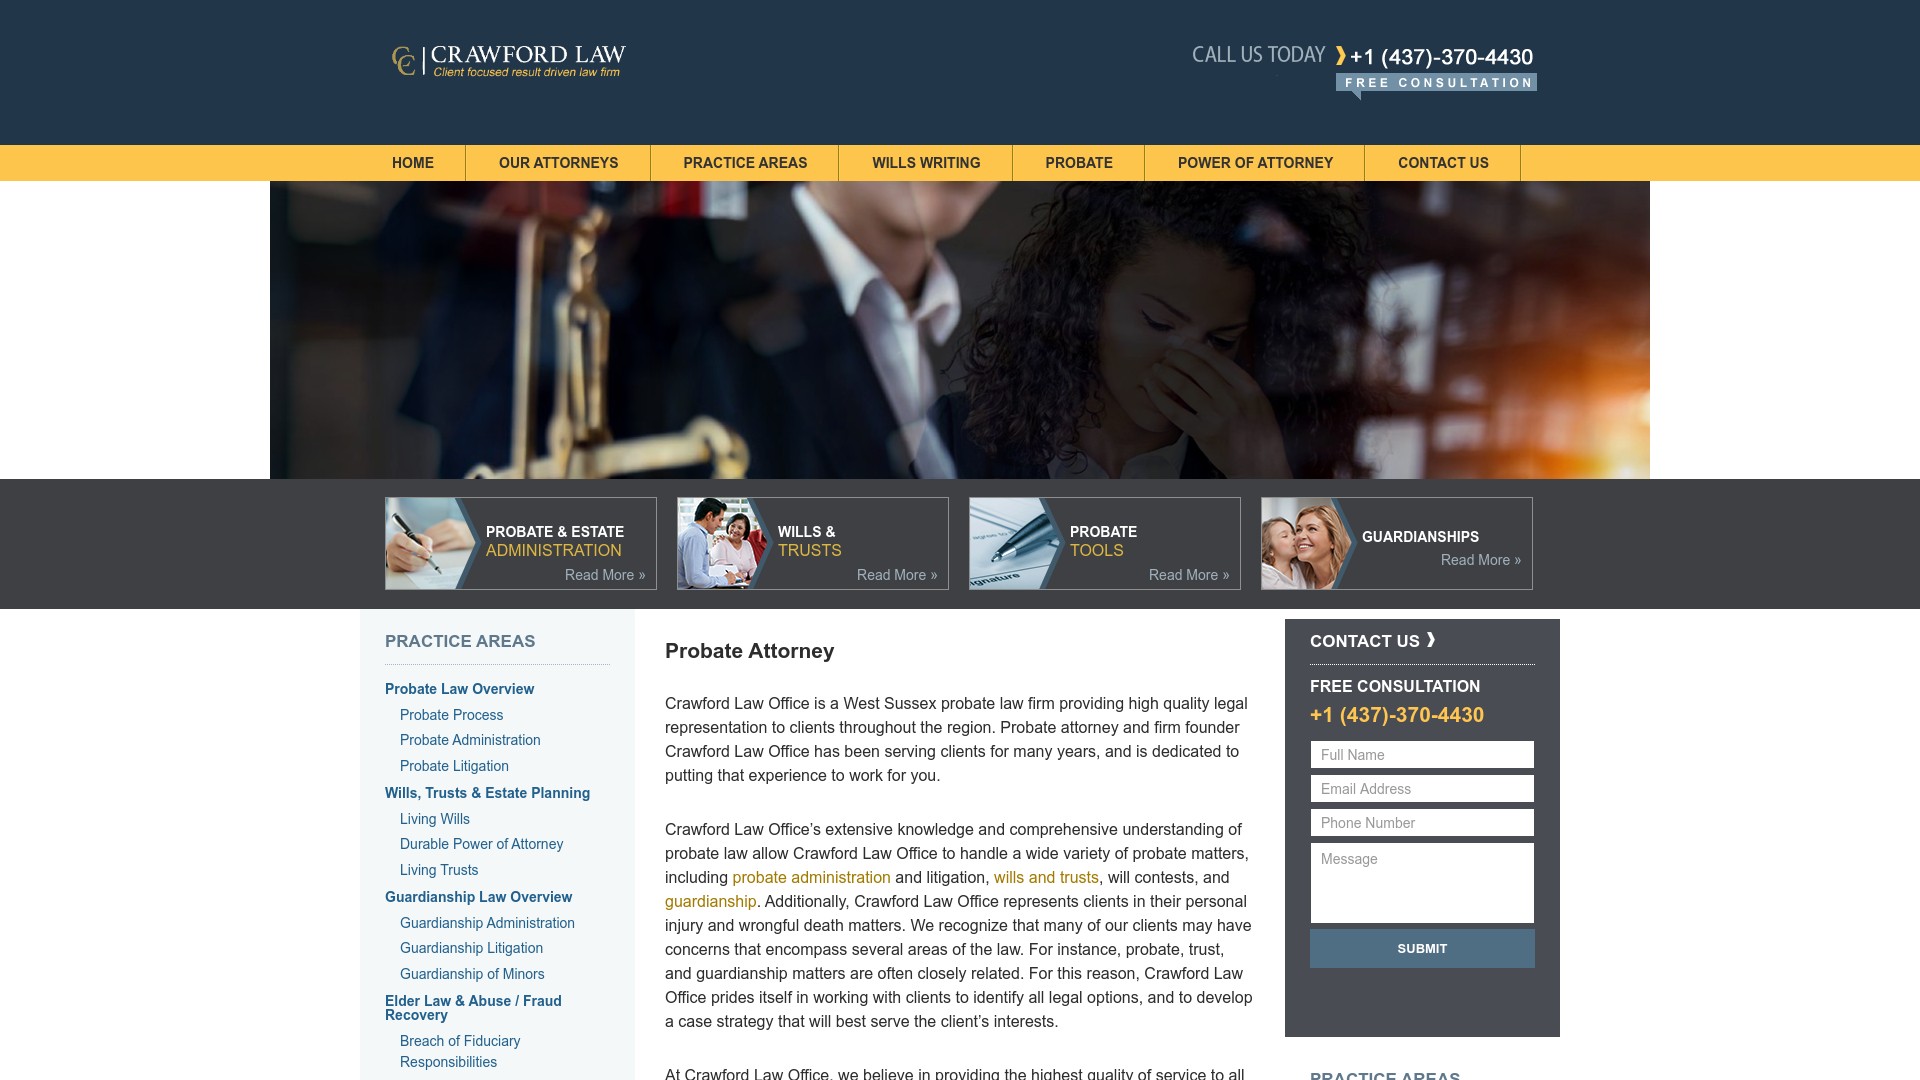 About Crawford Law Office at crawfordlaws.com